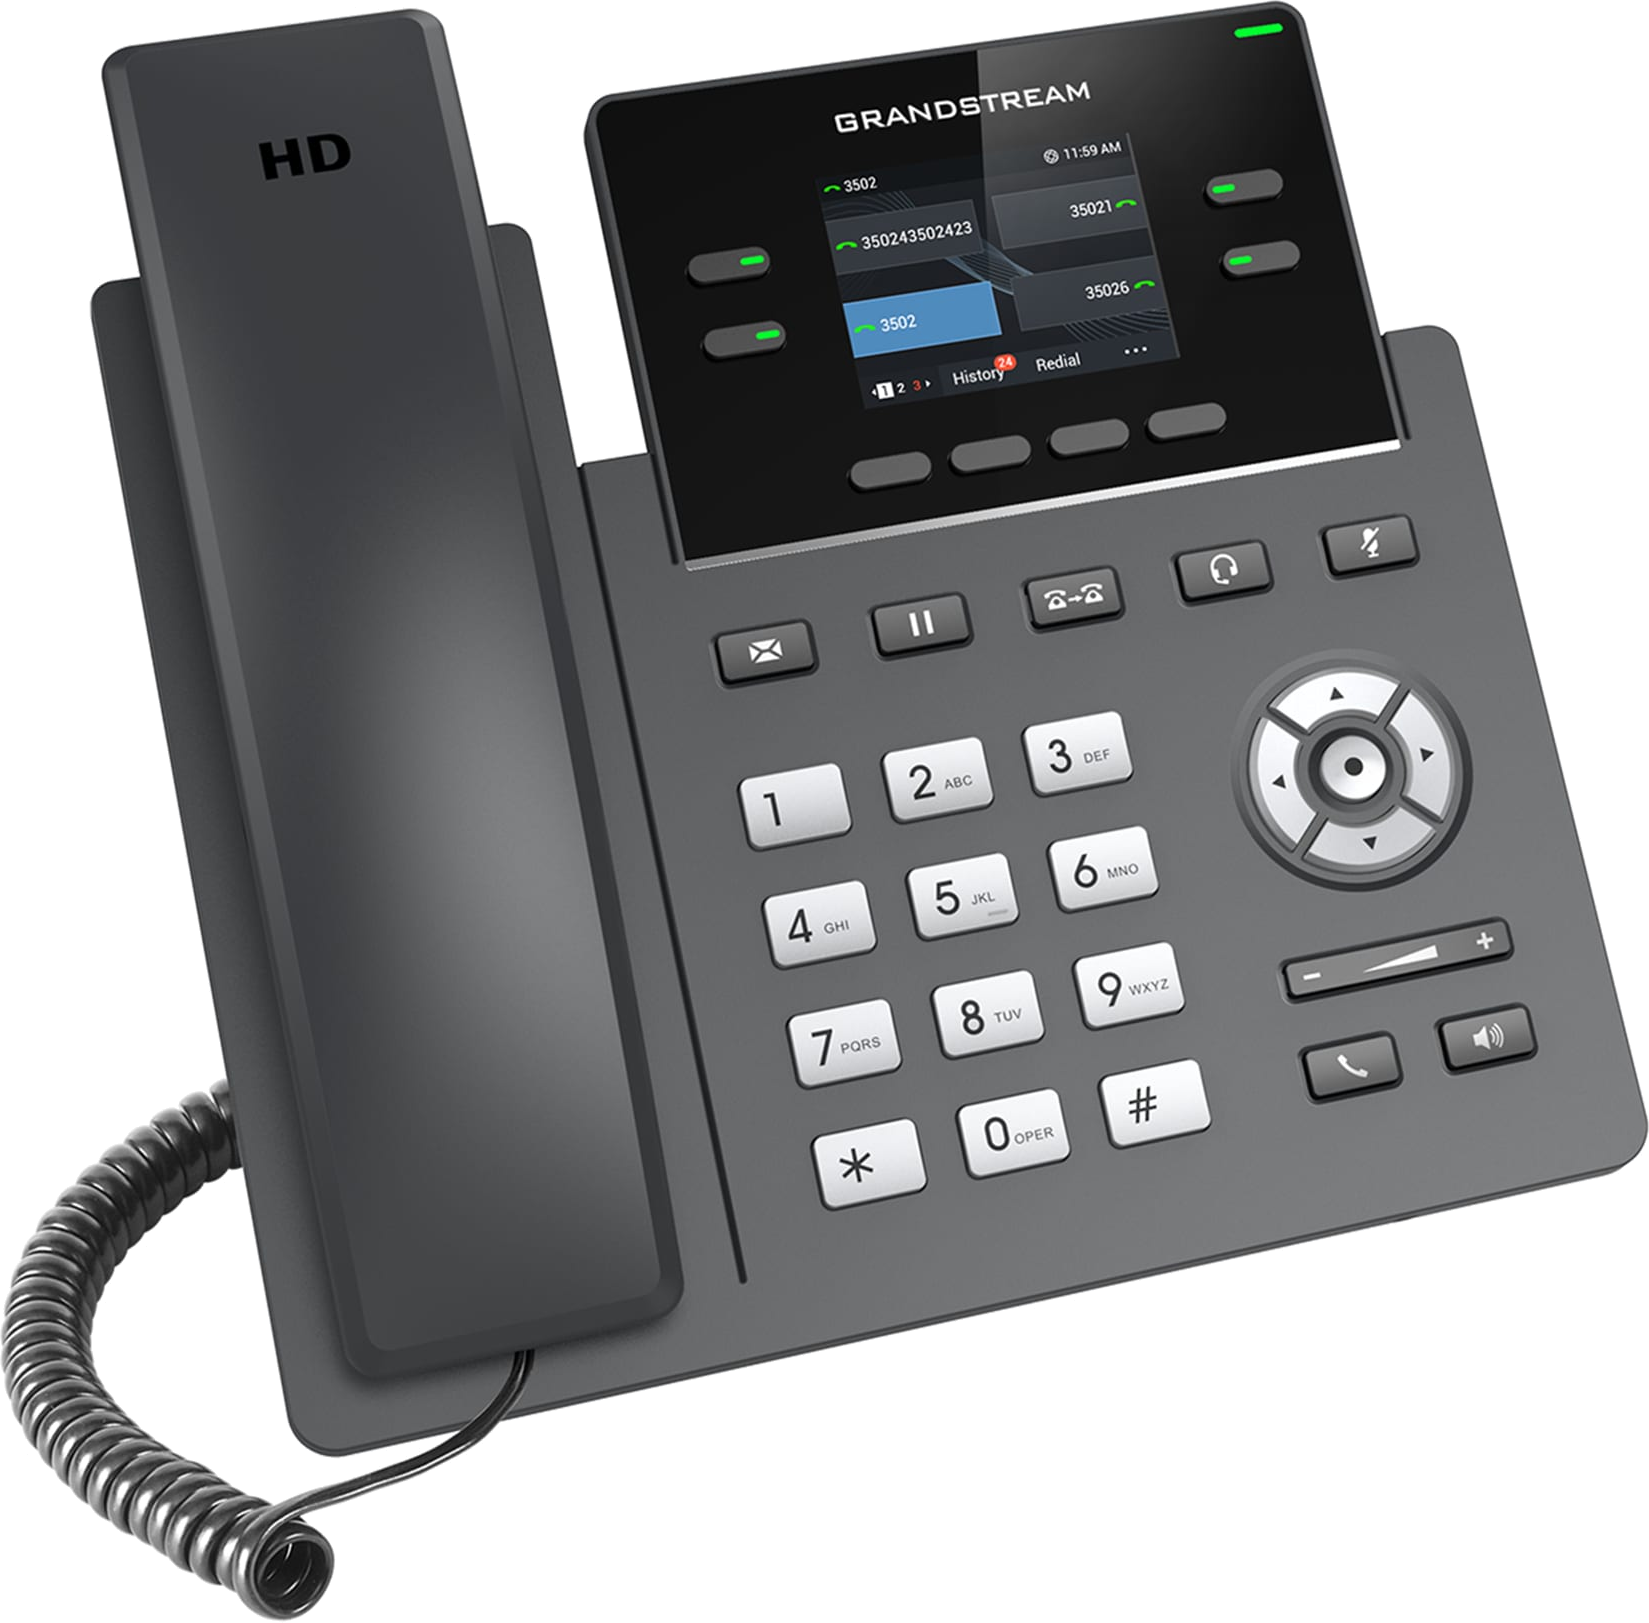 grandstream-phone VOIP PHONE SYSTEMS